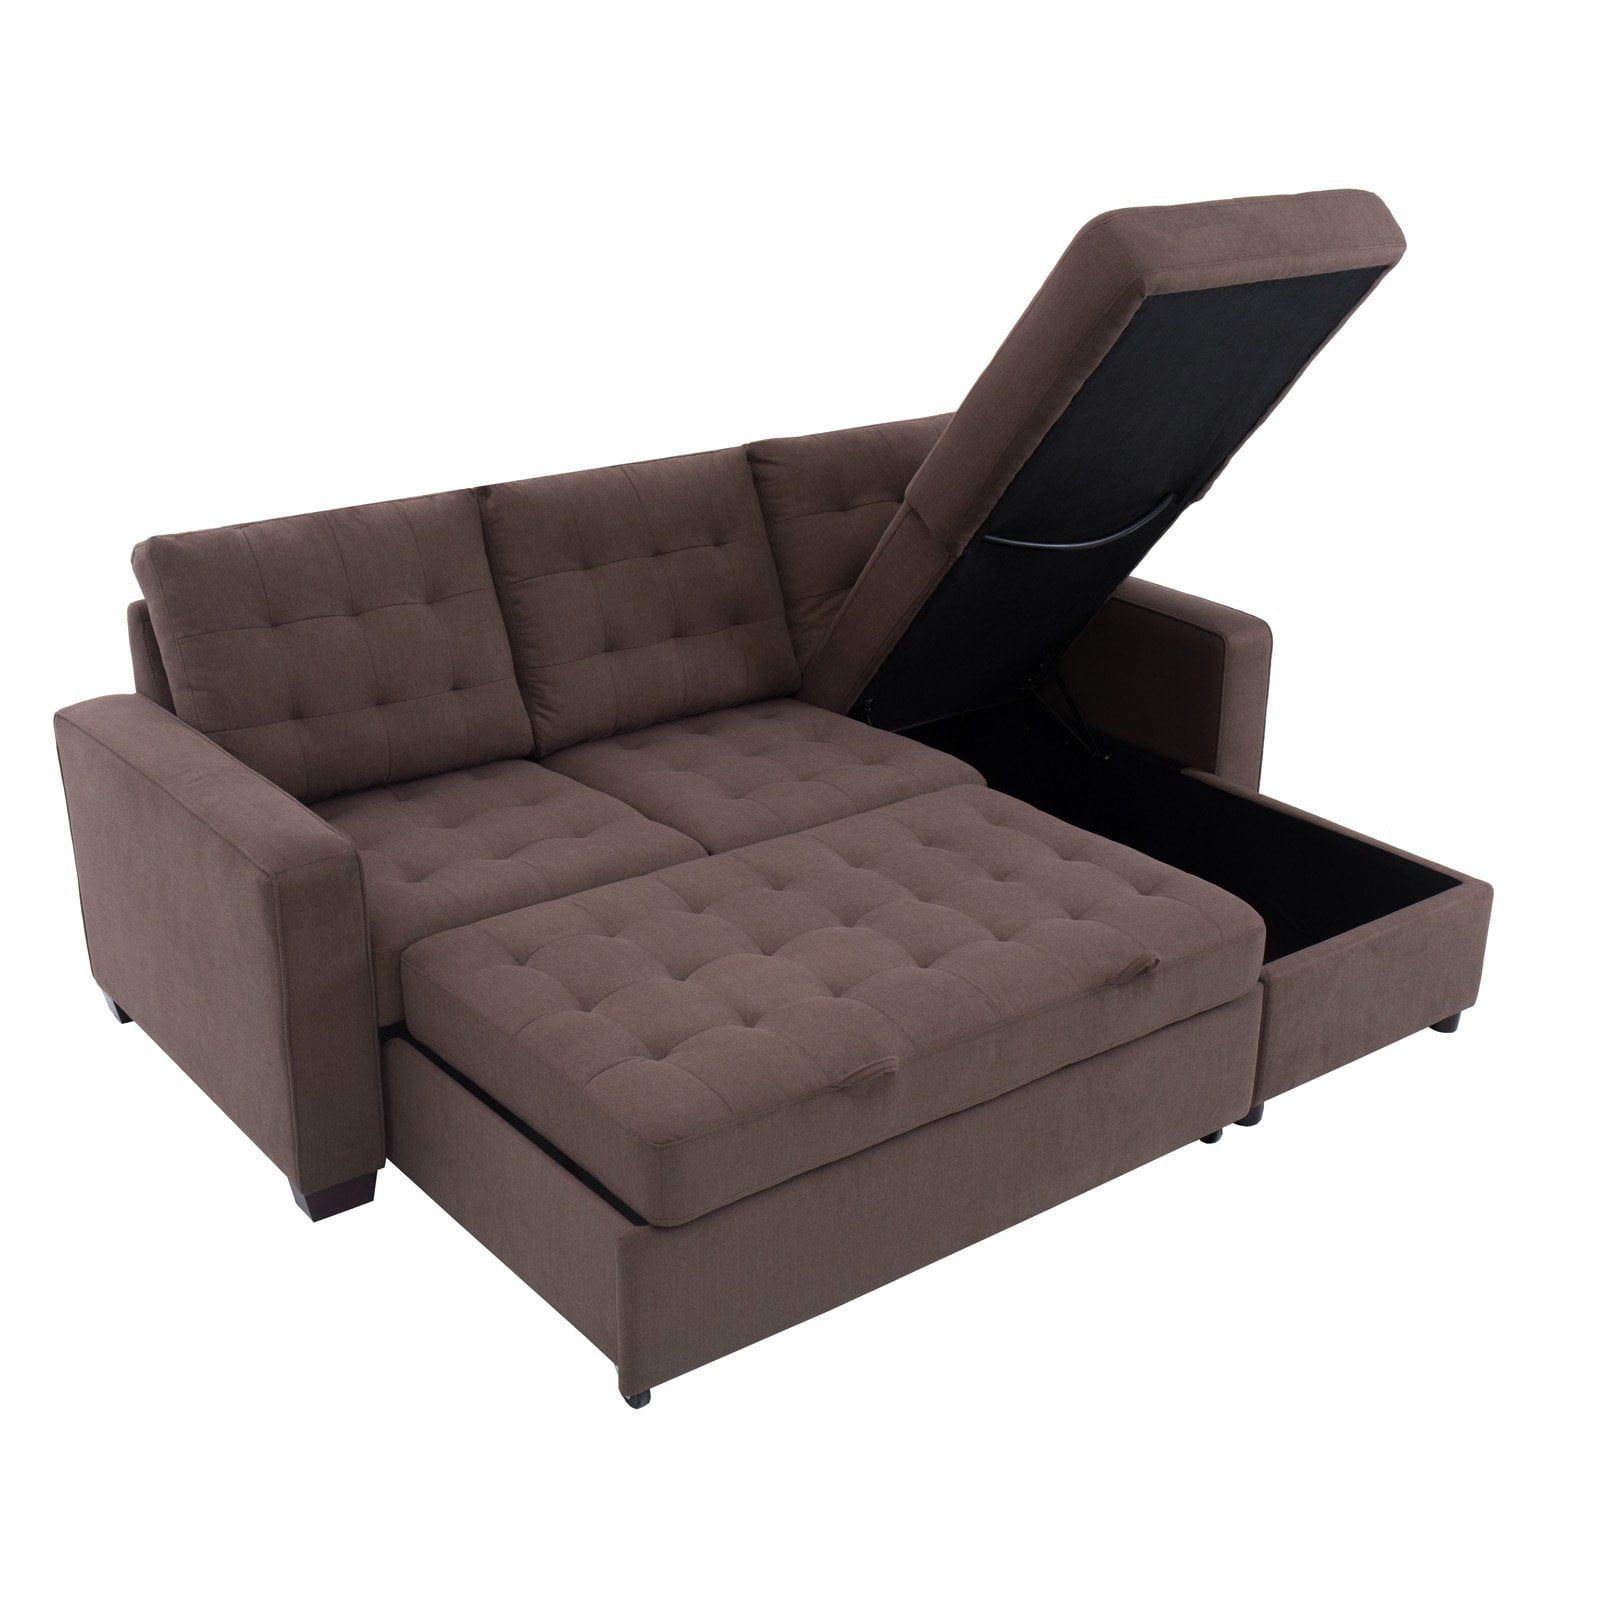 Bostal Serta Sofa Bed Convertible: Converts Into A Sofa, Chaise, Bed Pertaining To Queen Size Convertible Sofa Beds (View 20 of 20)